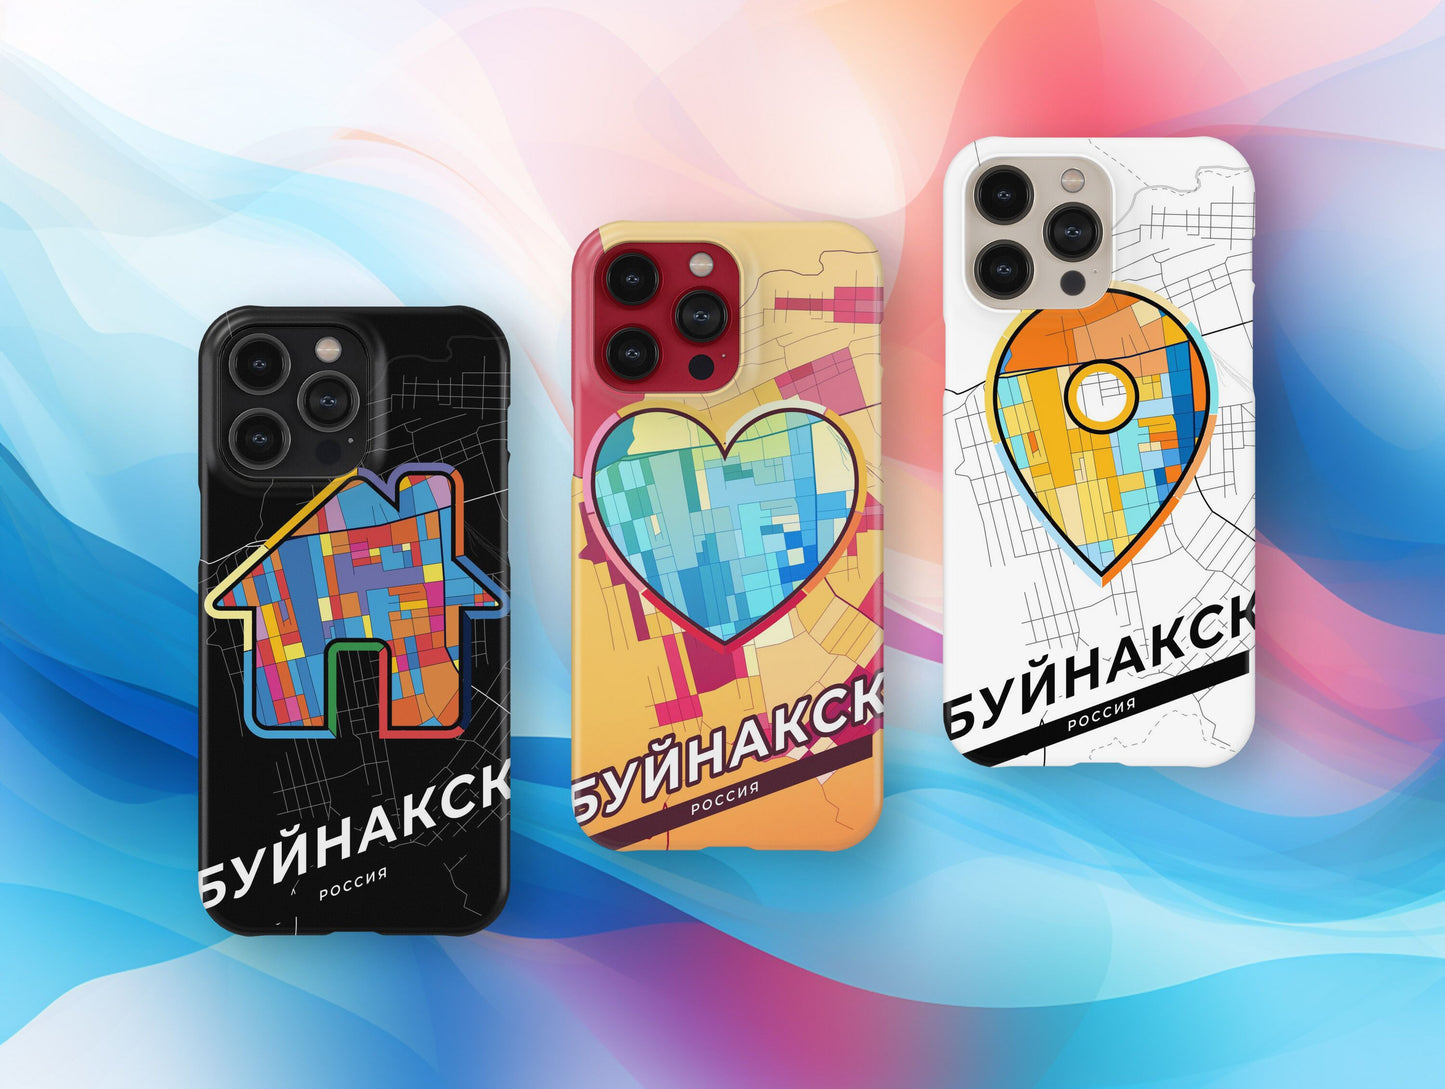 Buynaksk Russia slim phone case with colorful icon. Birthday, wedding or housewarming gift. Couple match cases.